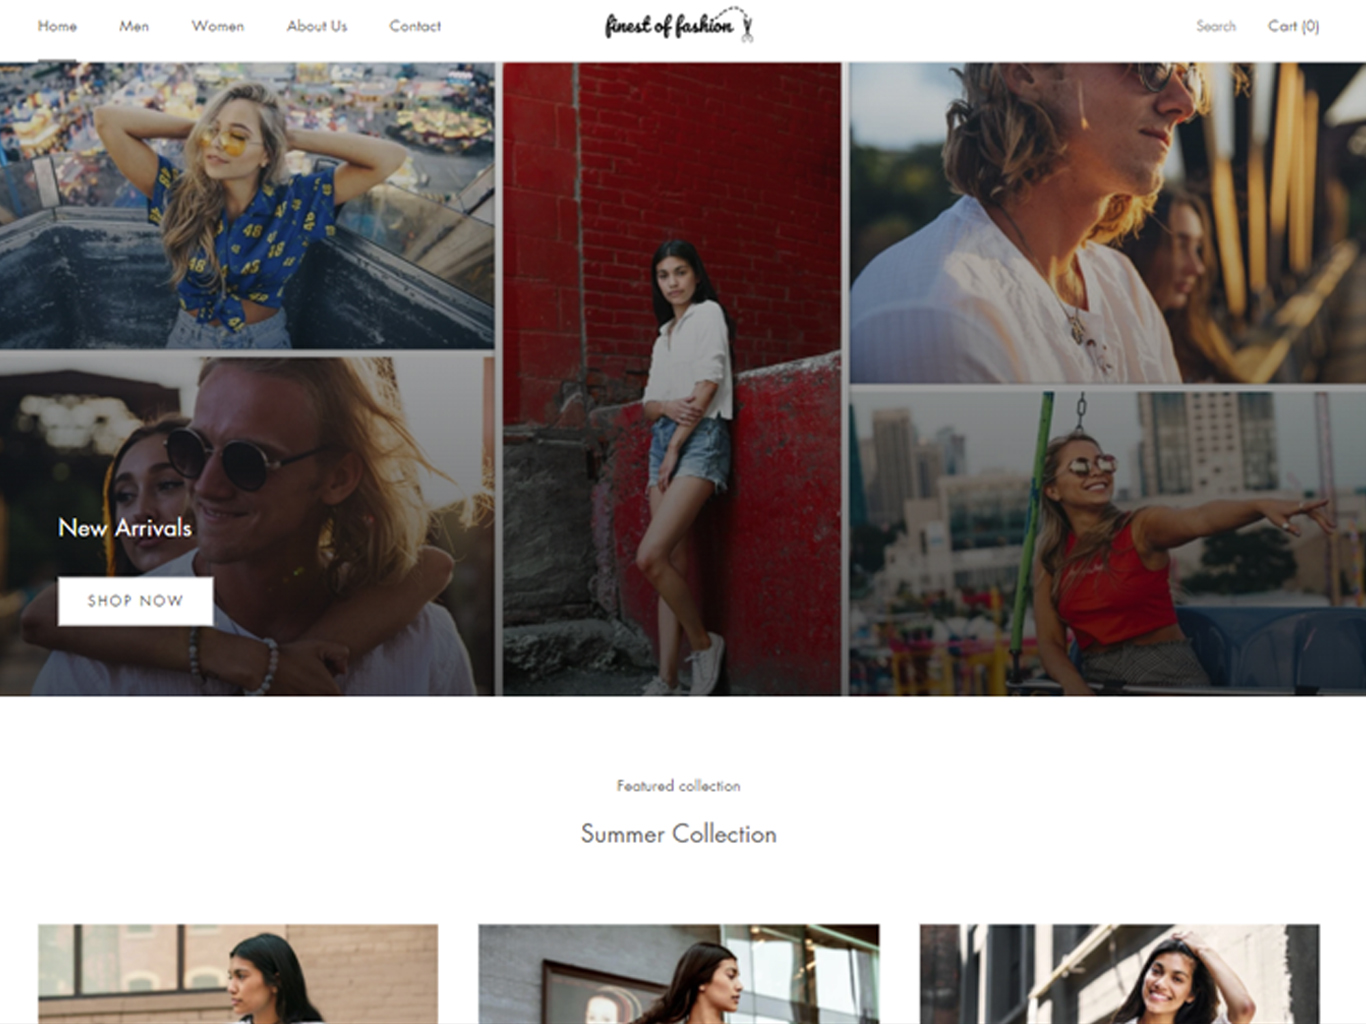 Display of homepage for fictional store, Finest of Fashion, on Shopify.